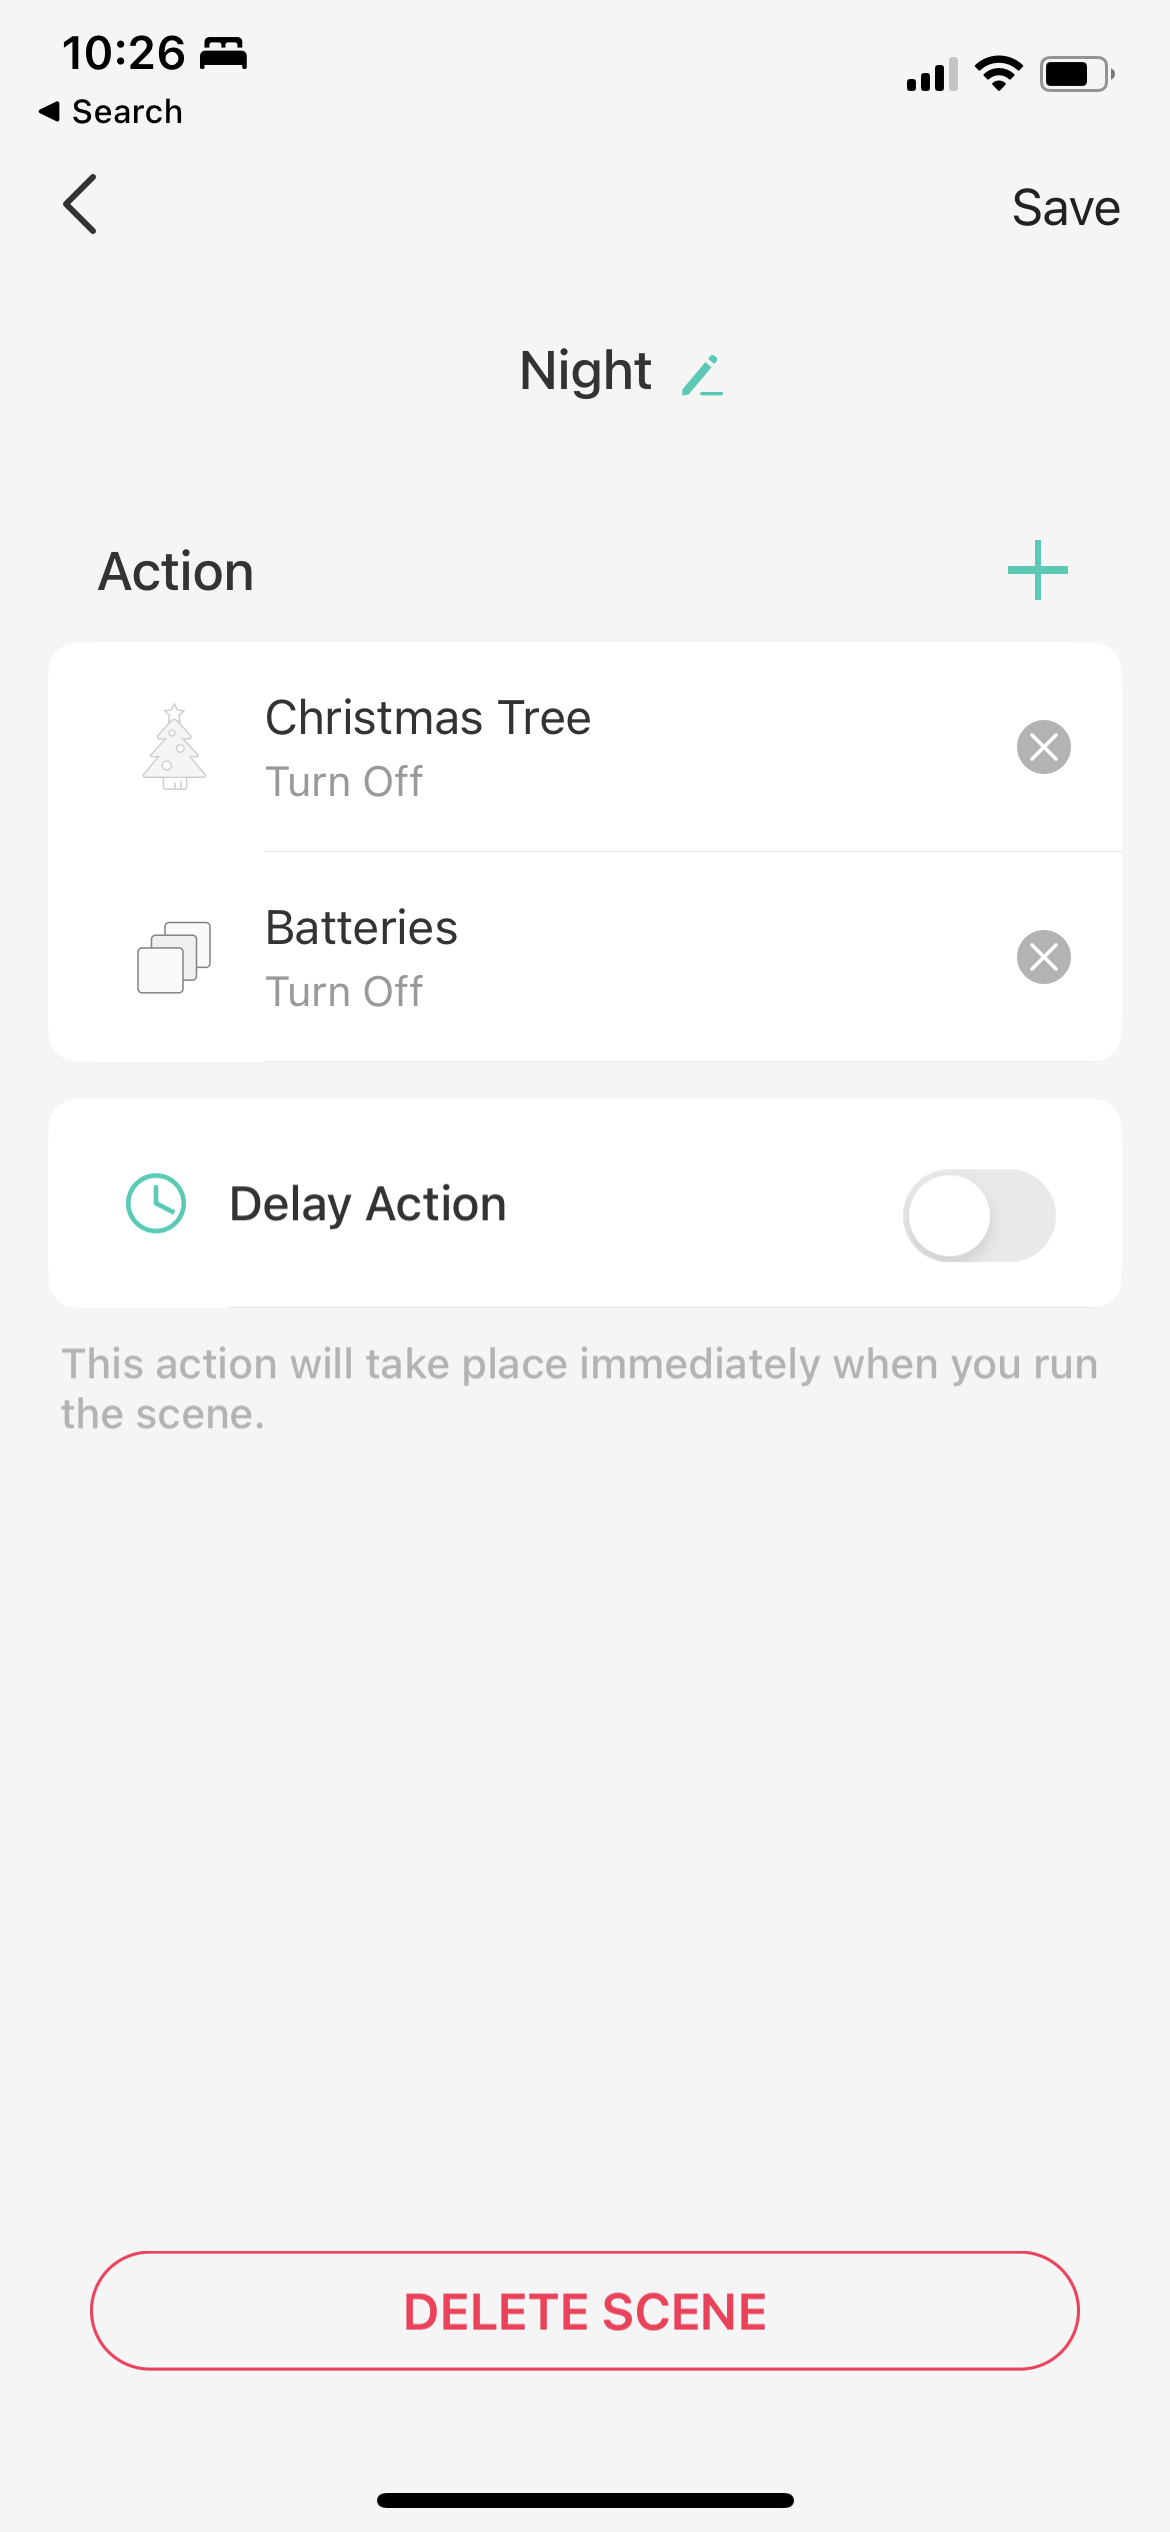 A screenshot of a Kasa scene with an action to turn Christmas Tree off and an action to turn off the 'Batteries' group.